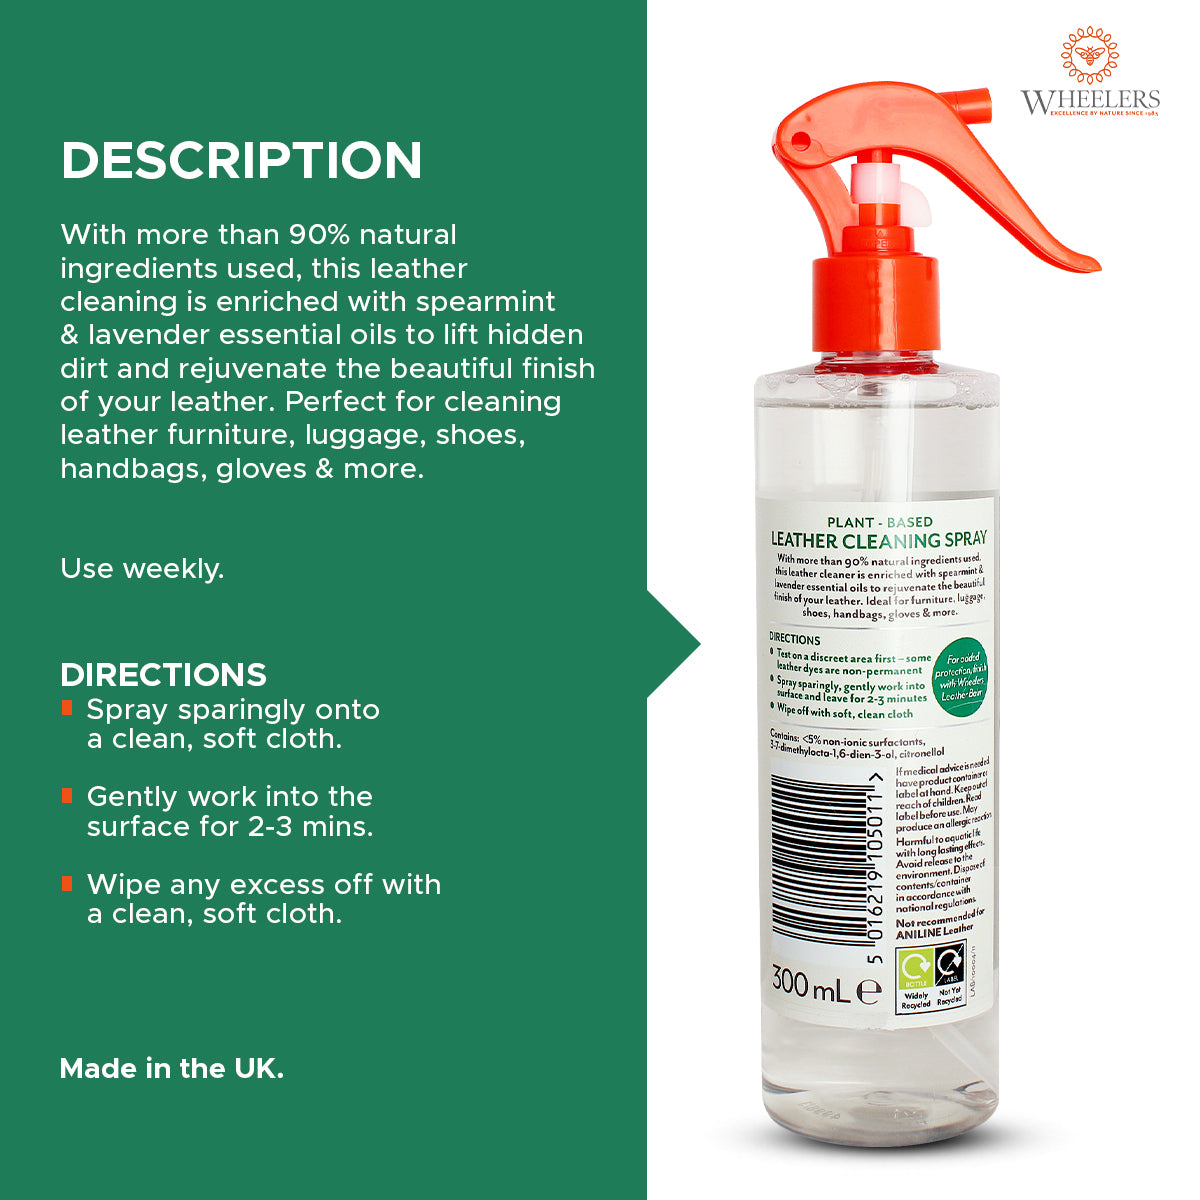 Wheelers Leather Cleaning Spray - Bloom Concept